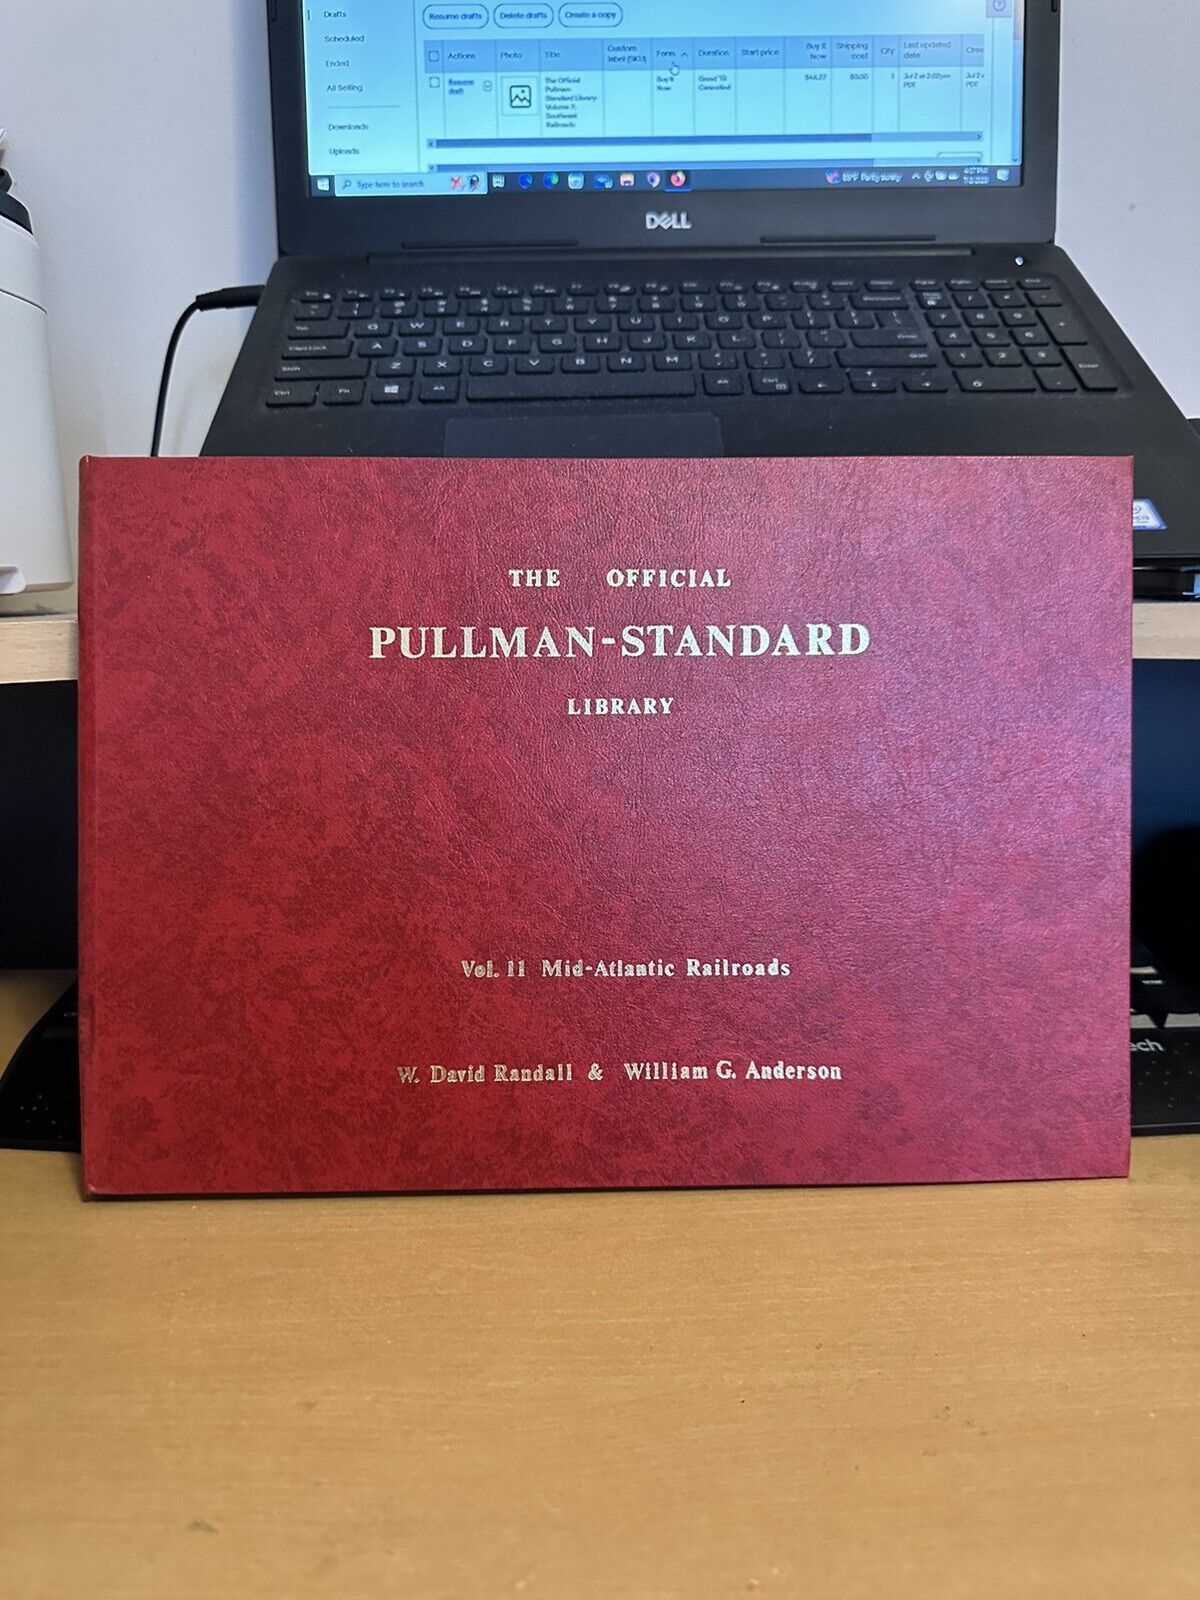 The Official Pullman-Standard Library-Volume 11: Mid-Atlantic Railroads